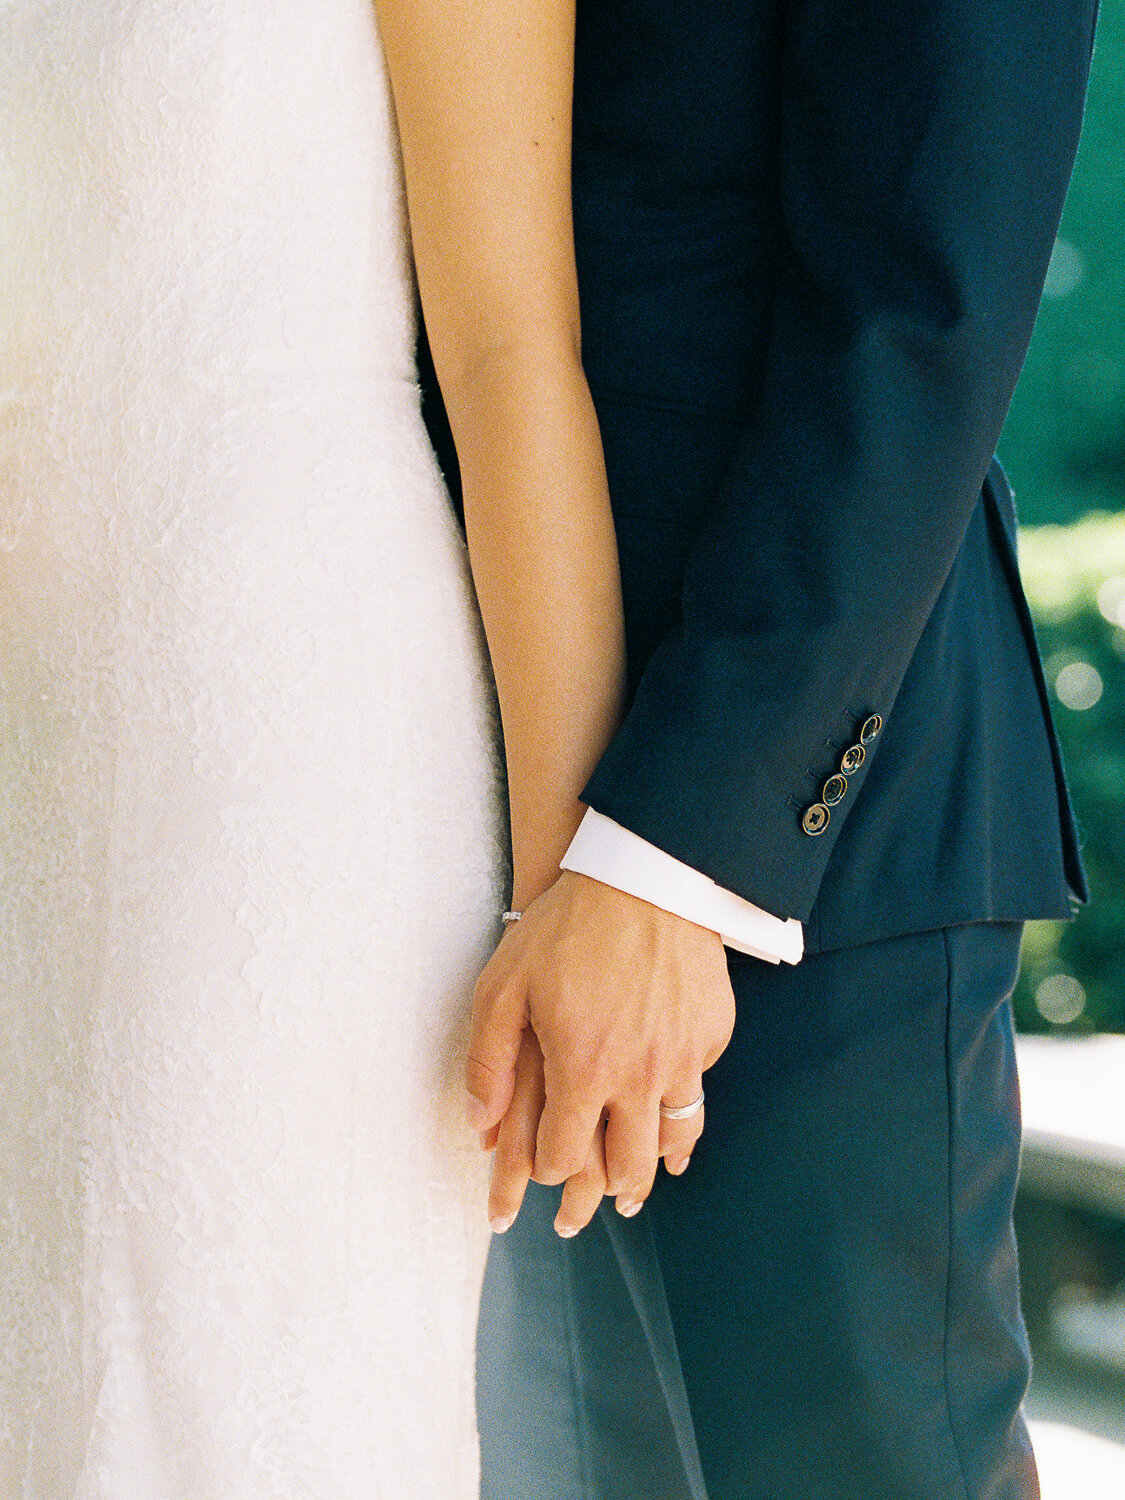 bride-and-groom-holding-hands-detail